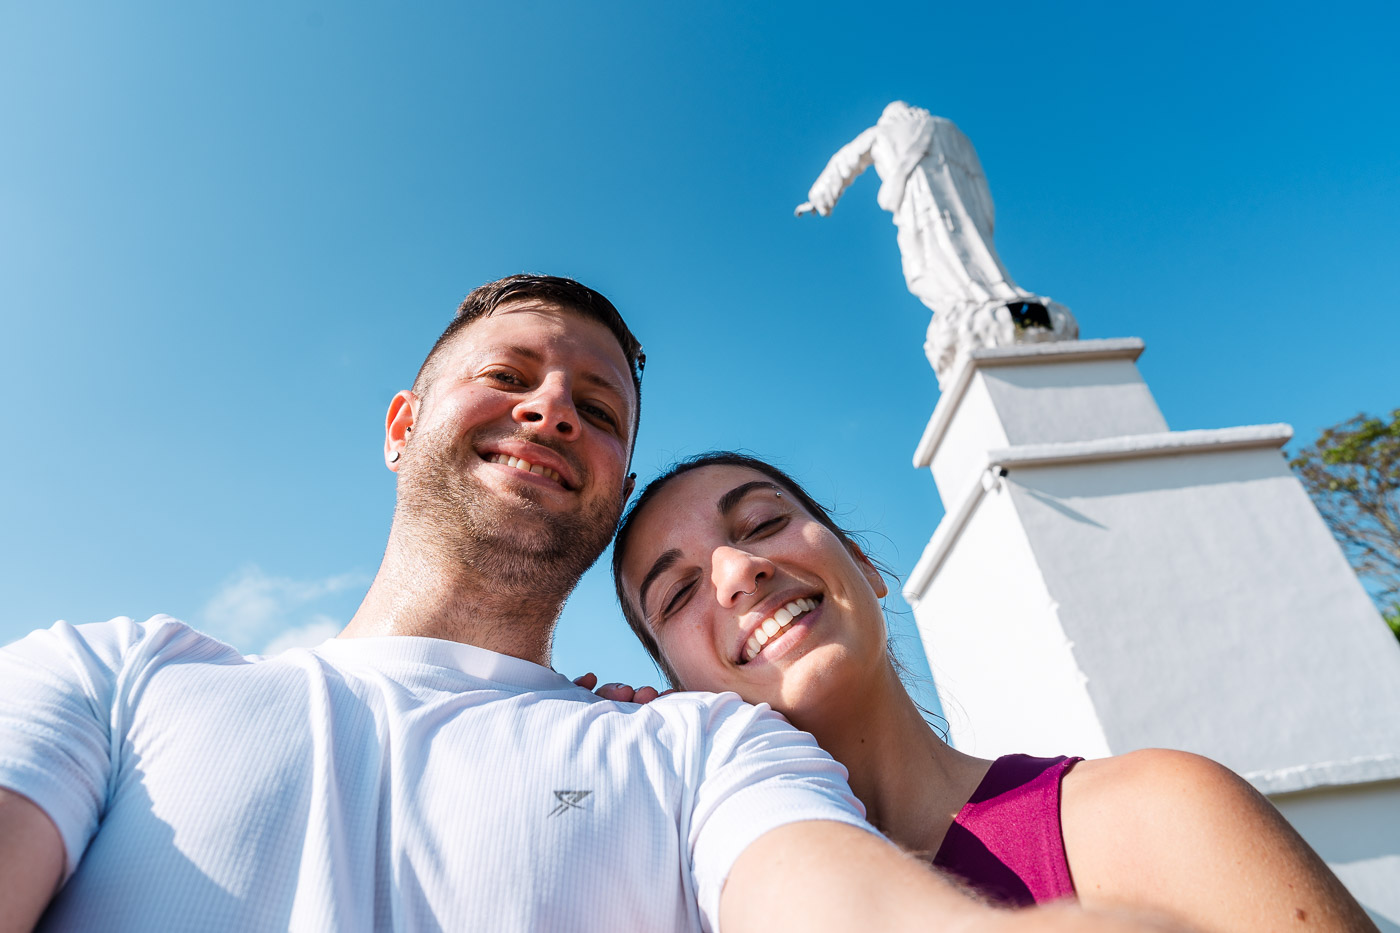 A selfie of Ryan and Sara standing under the Cristo Rey statue on a sunny day.